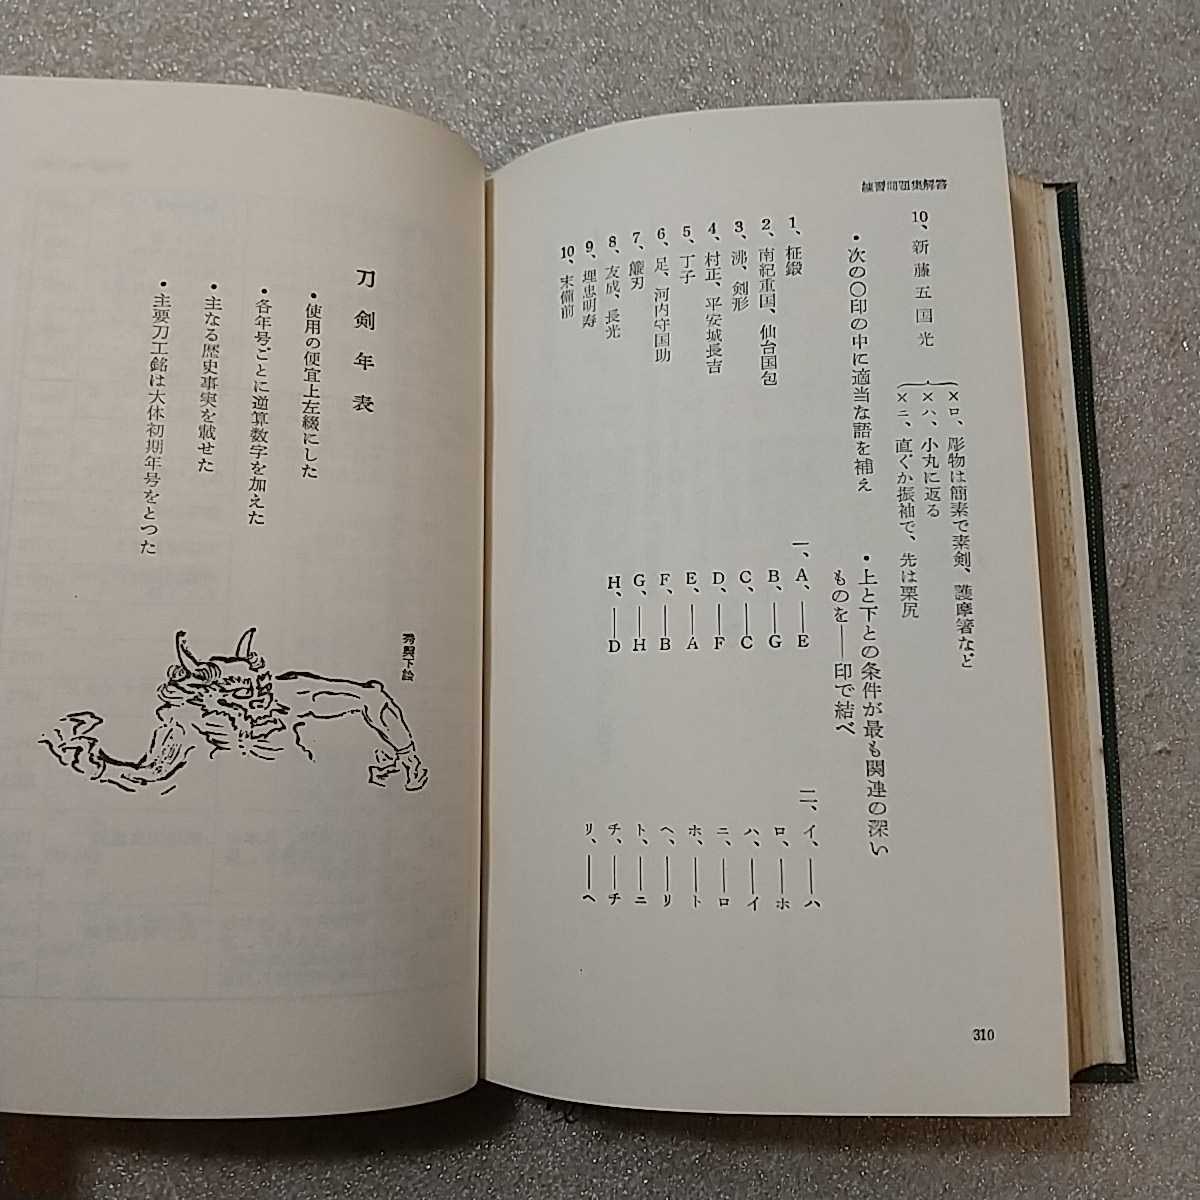 zaa-329! sword . judgment hand . fine art club publish company 1955/7/10 member exclusive use notebook old book . paper 